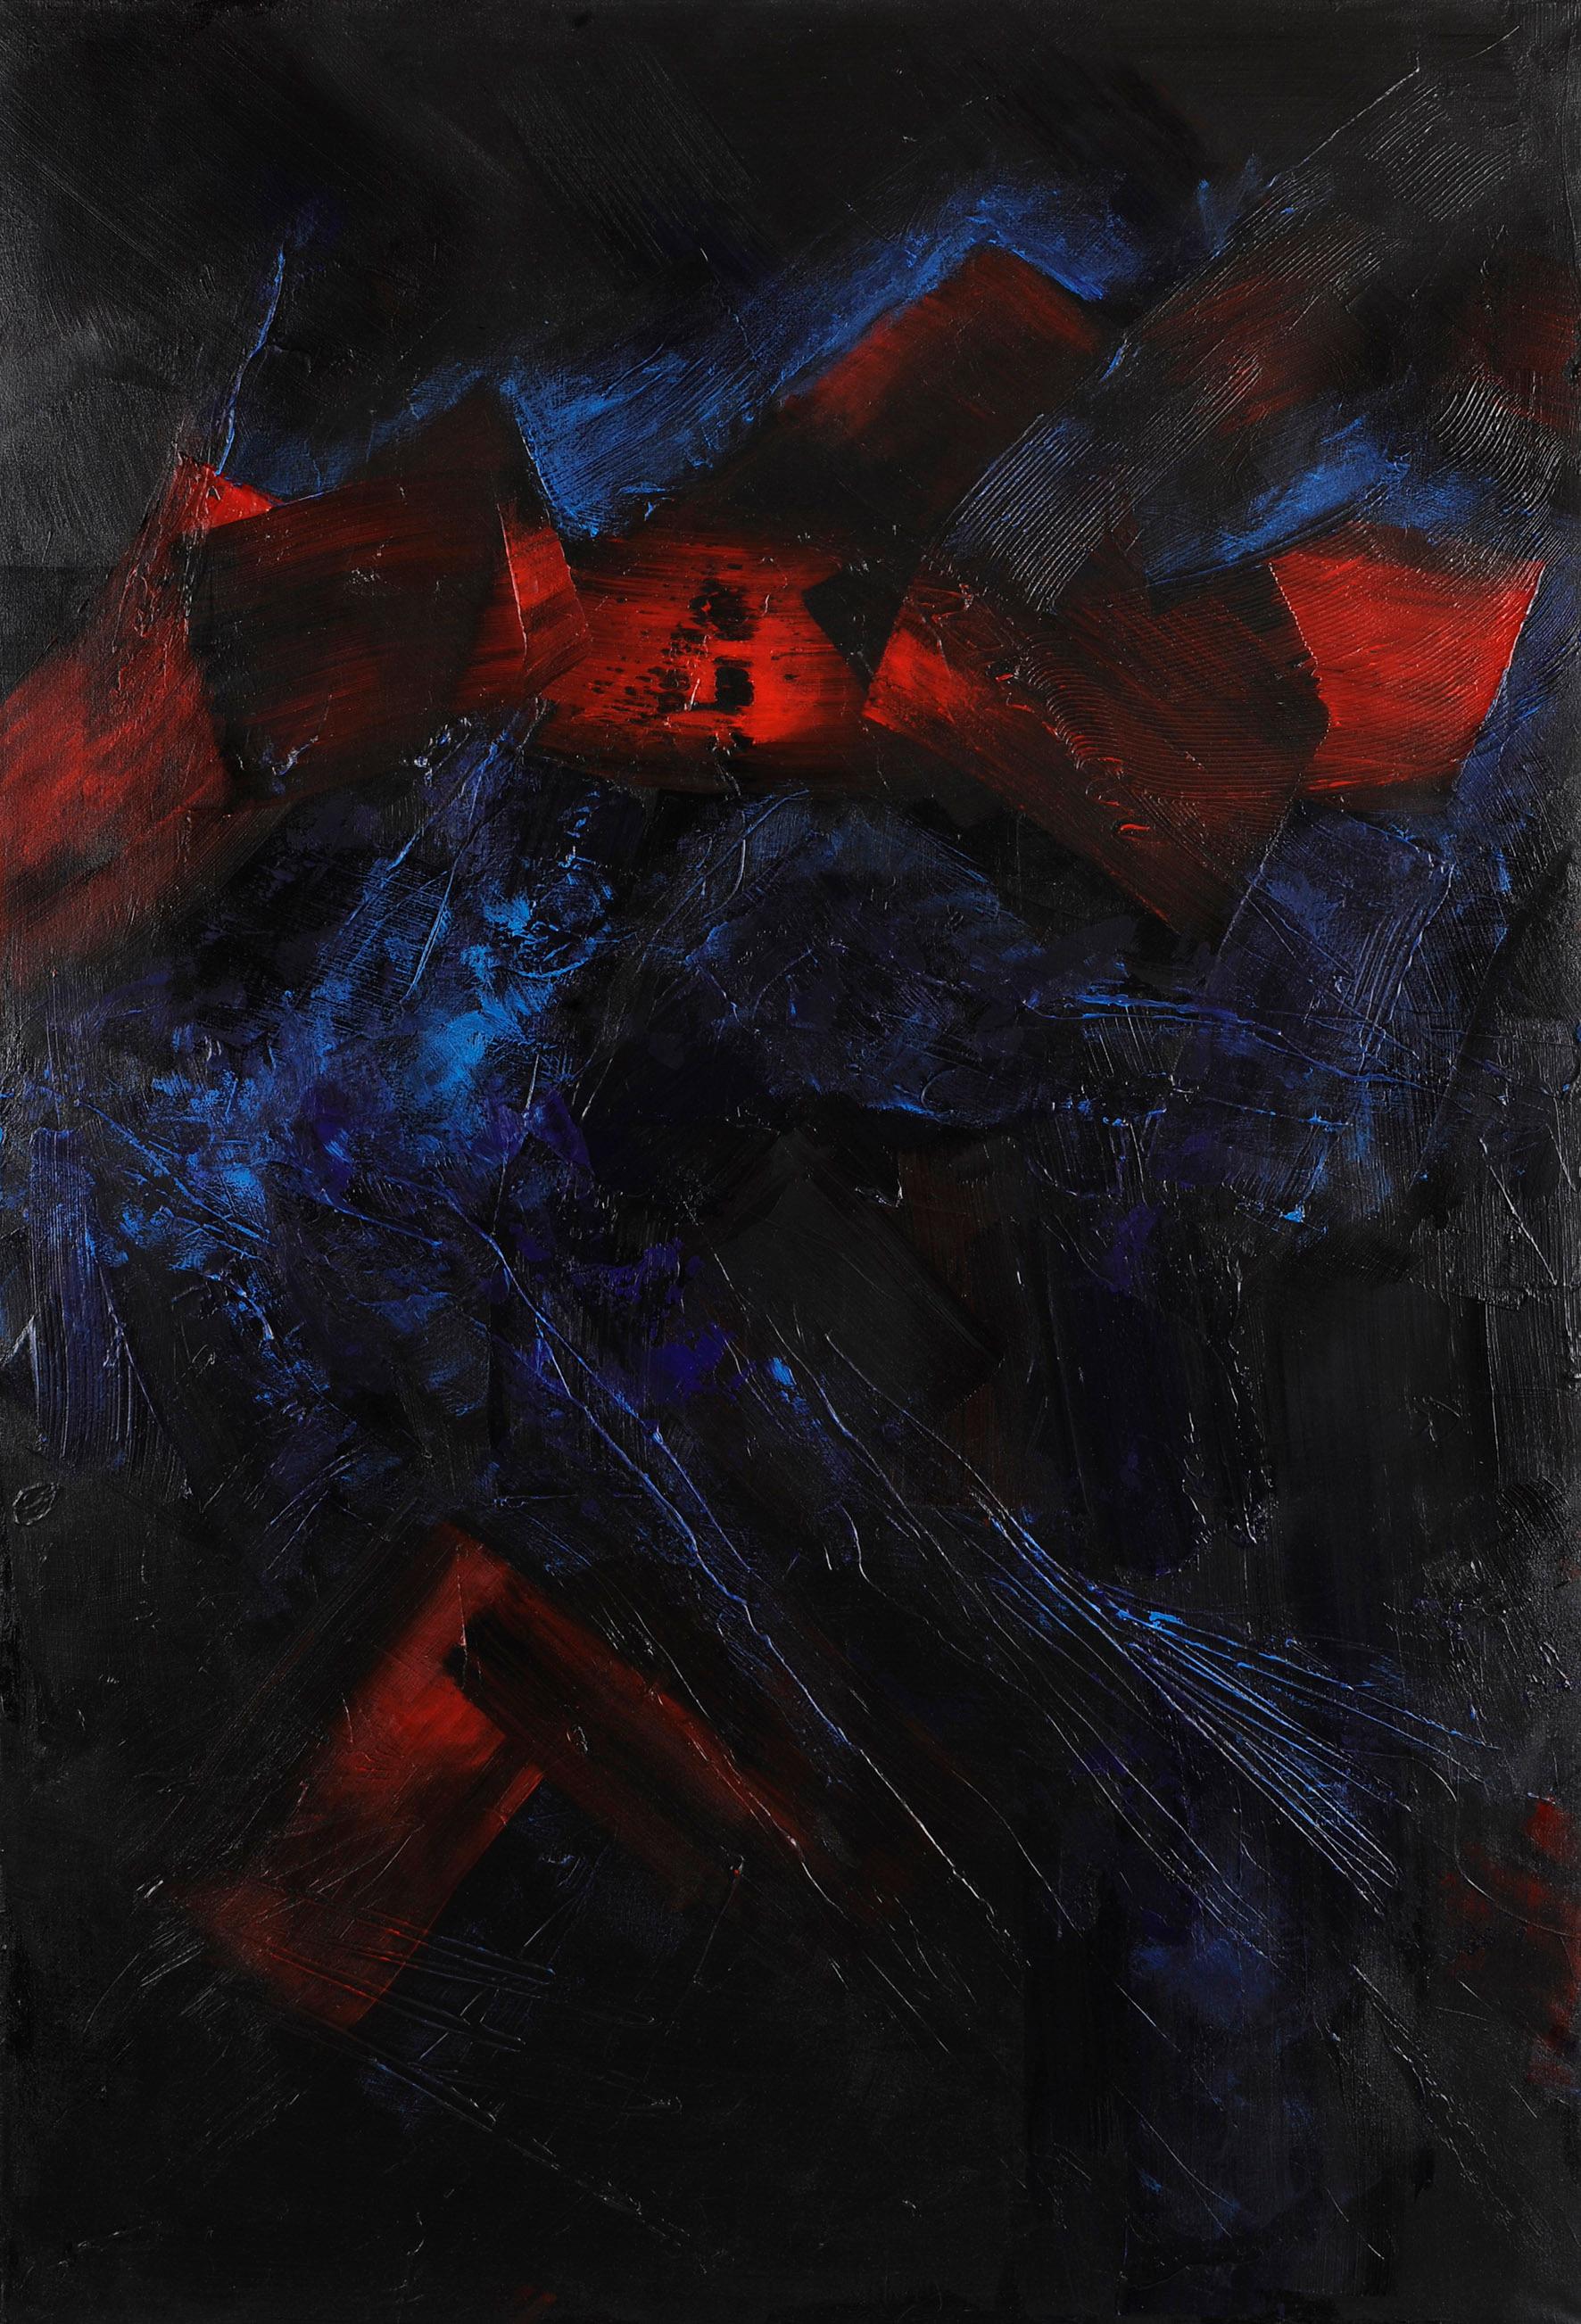 French Original 'Du noir jaillit le rouge' Abstract Painting by Christian Piednoir For Sale